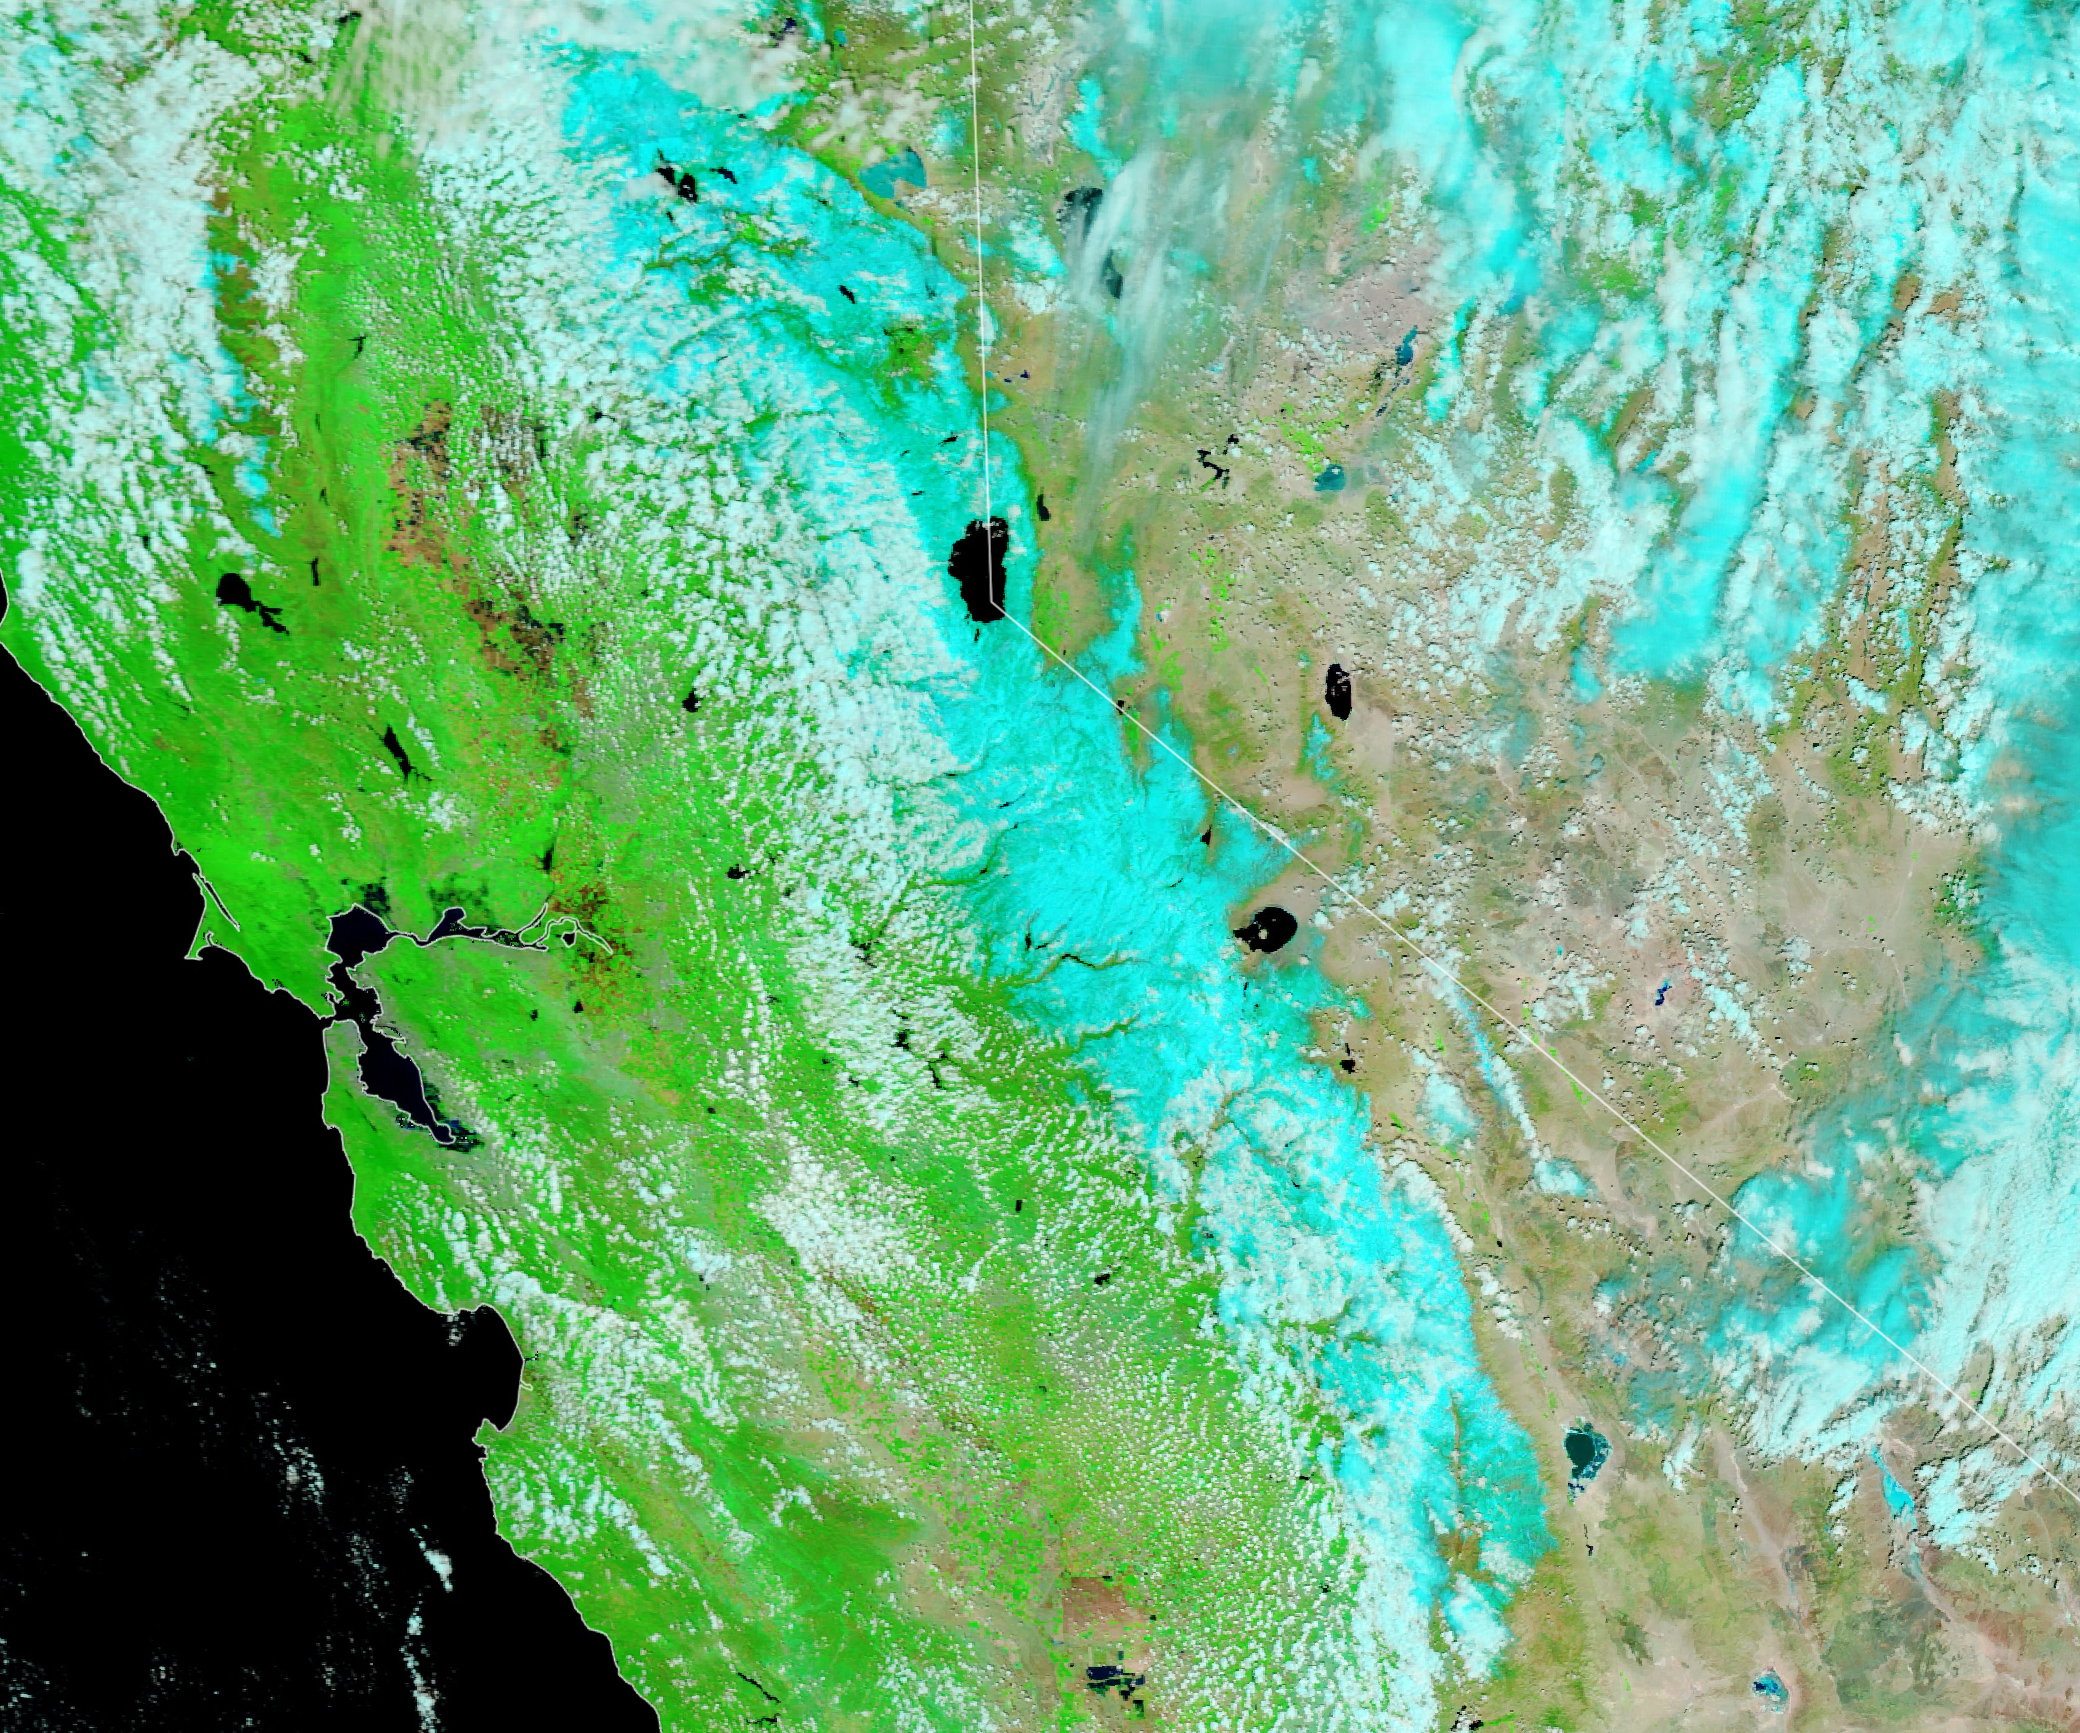 A false color satellite image of California where snow is highlighted light blue. The Eastern portion of the state shows a significant degree of snow coverage and to the west the land is a vibrant green.